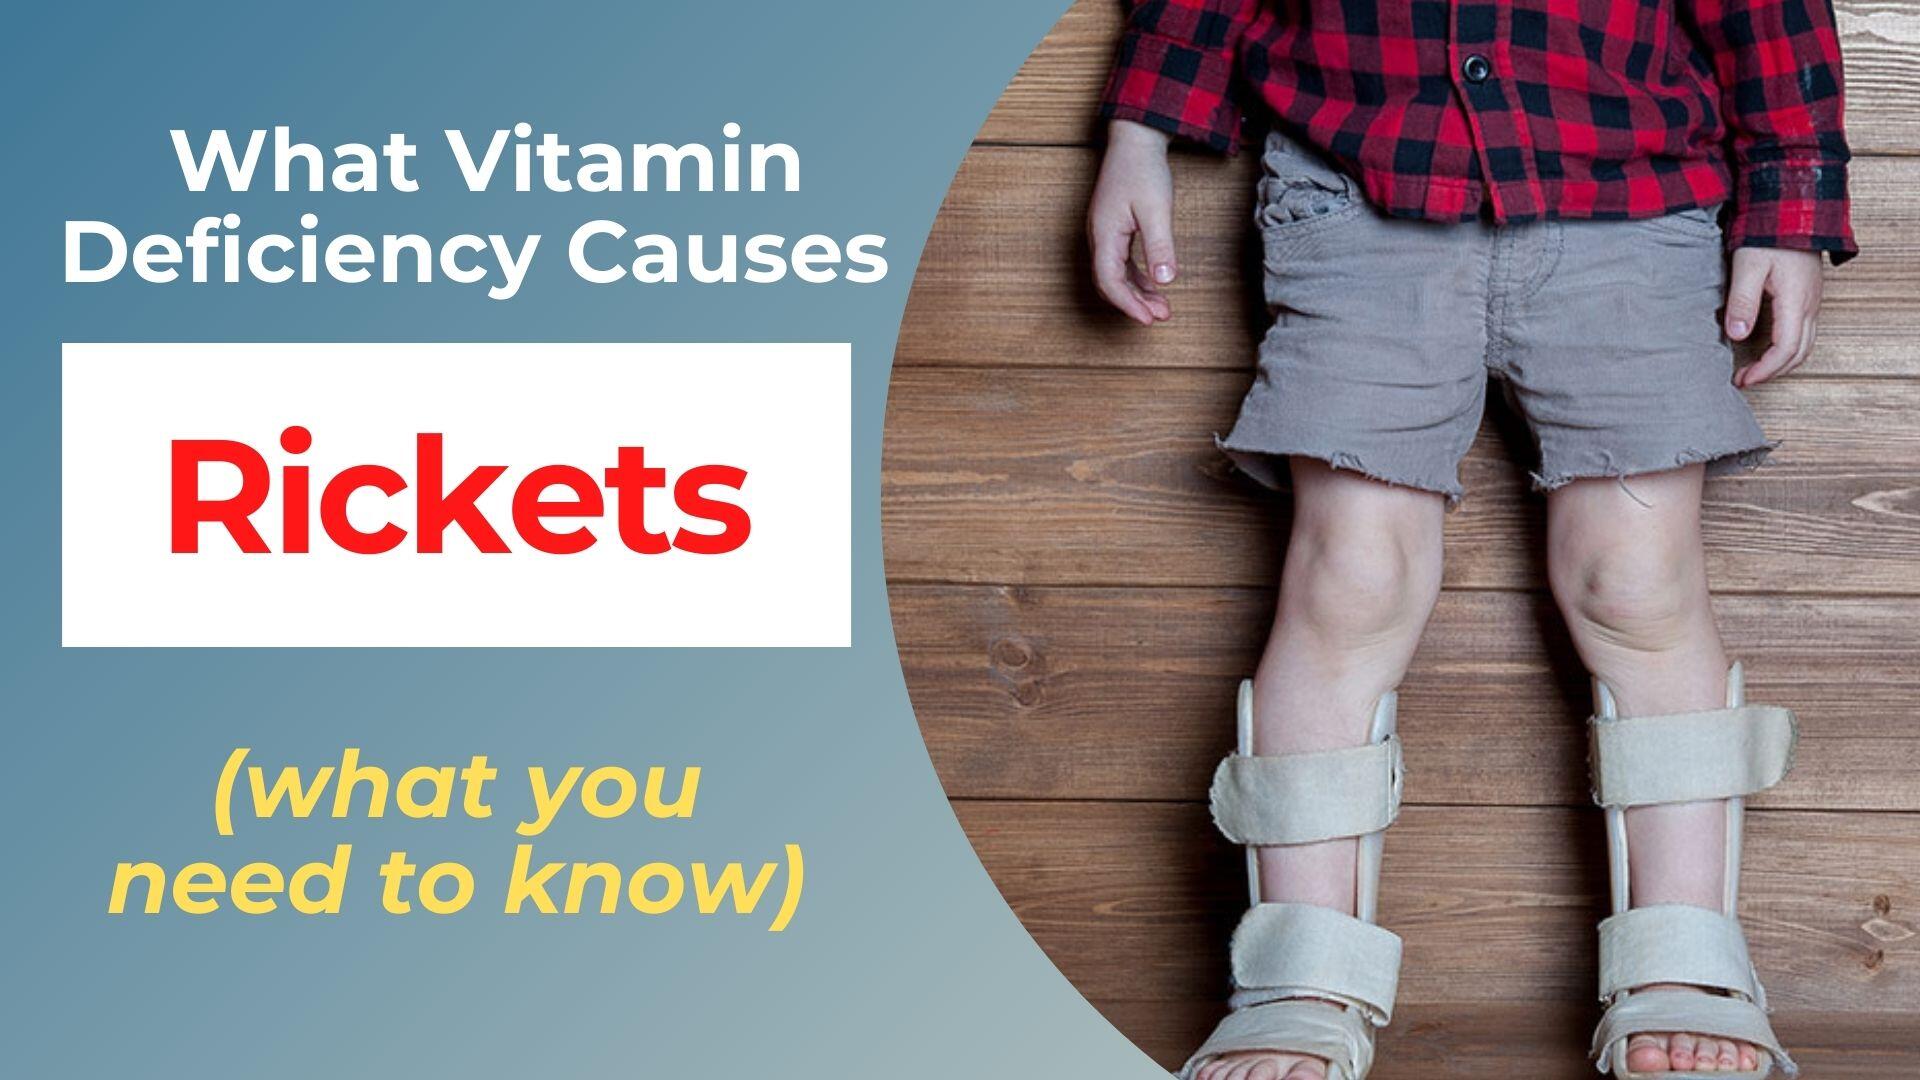 What Vitamin Deficiency Causes Rickets